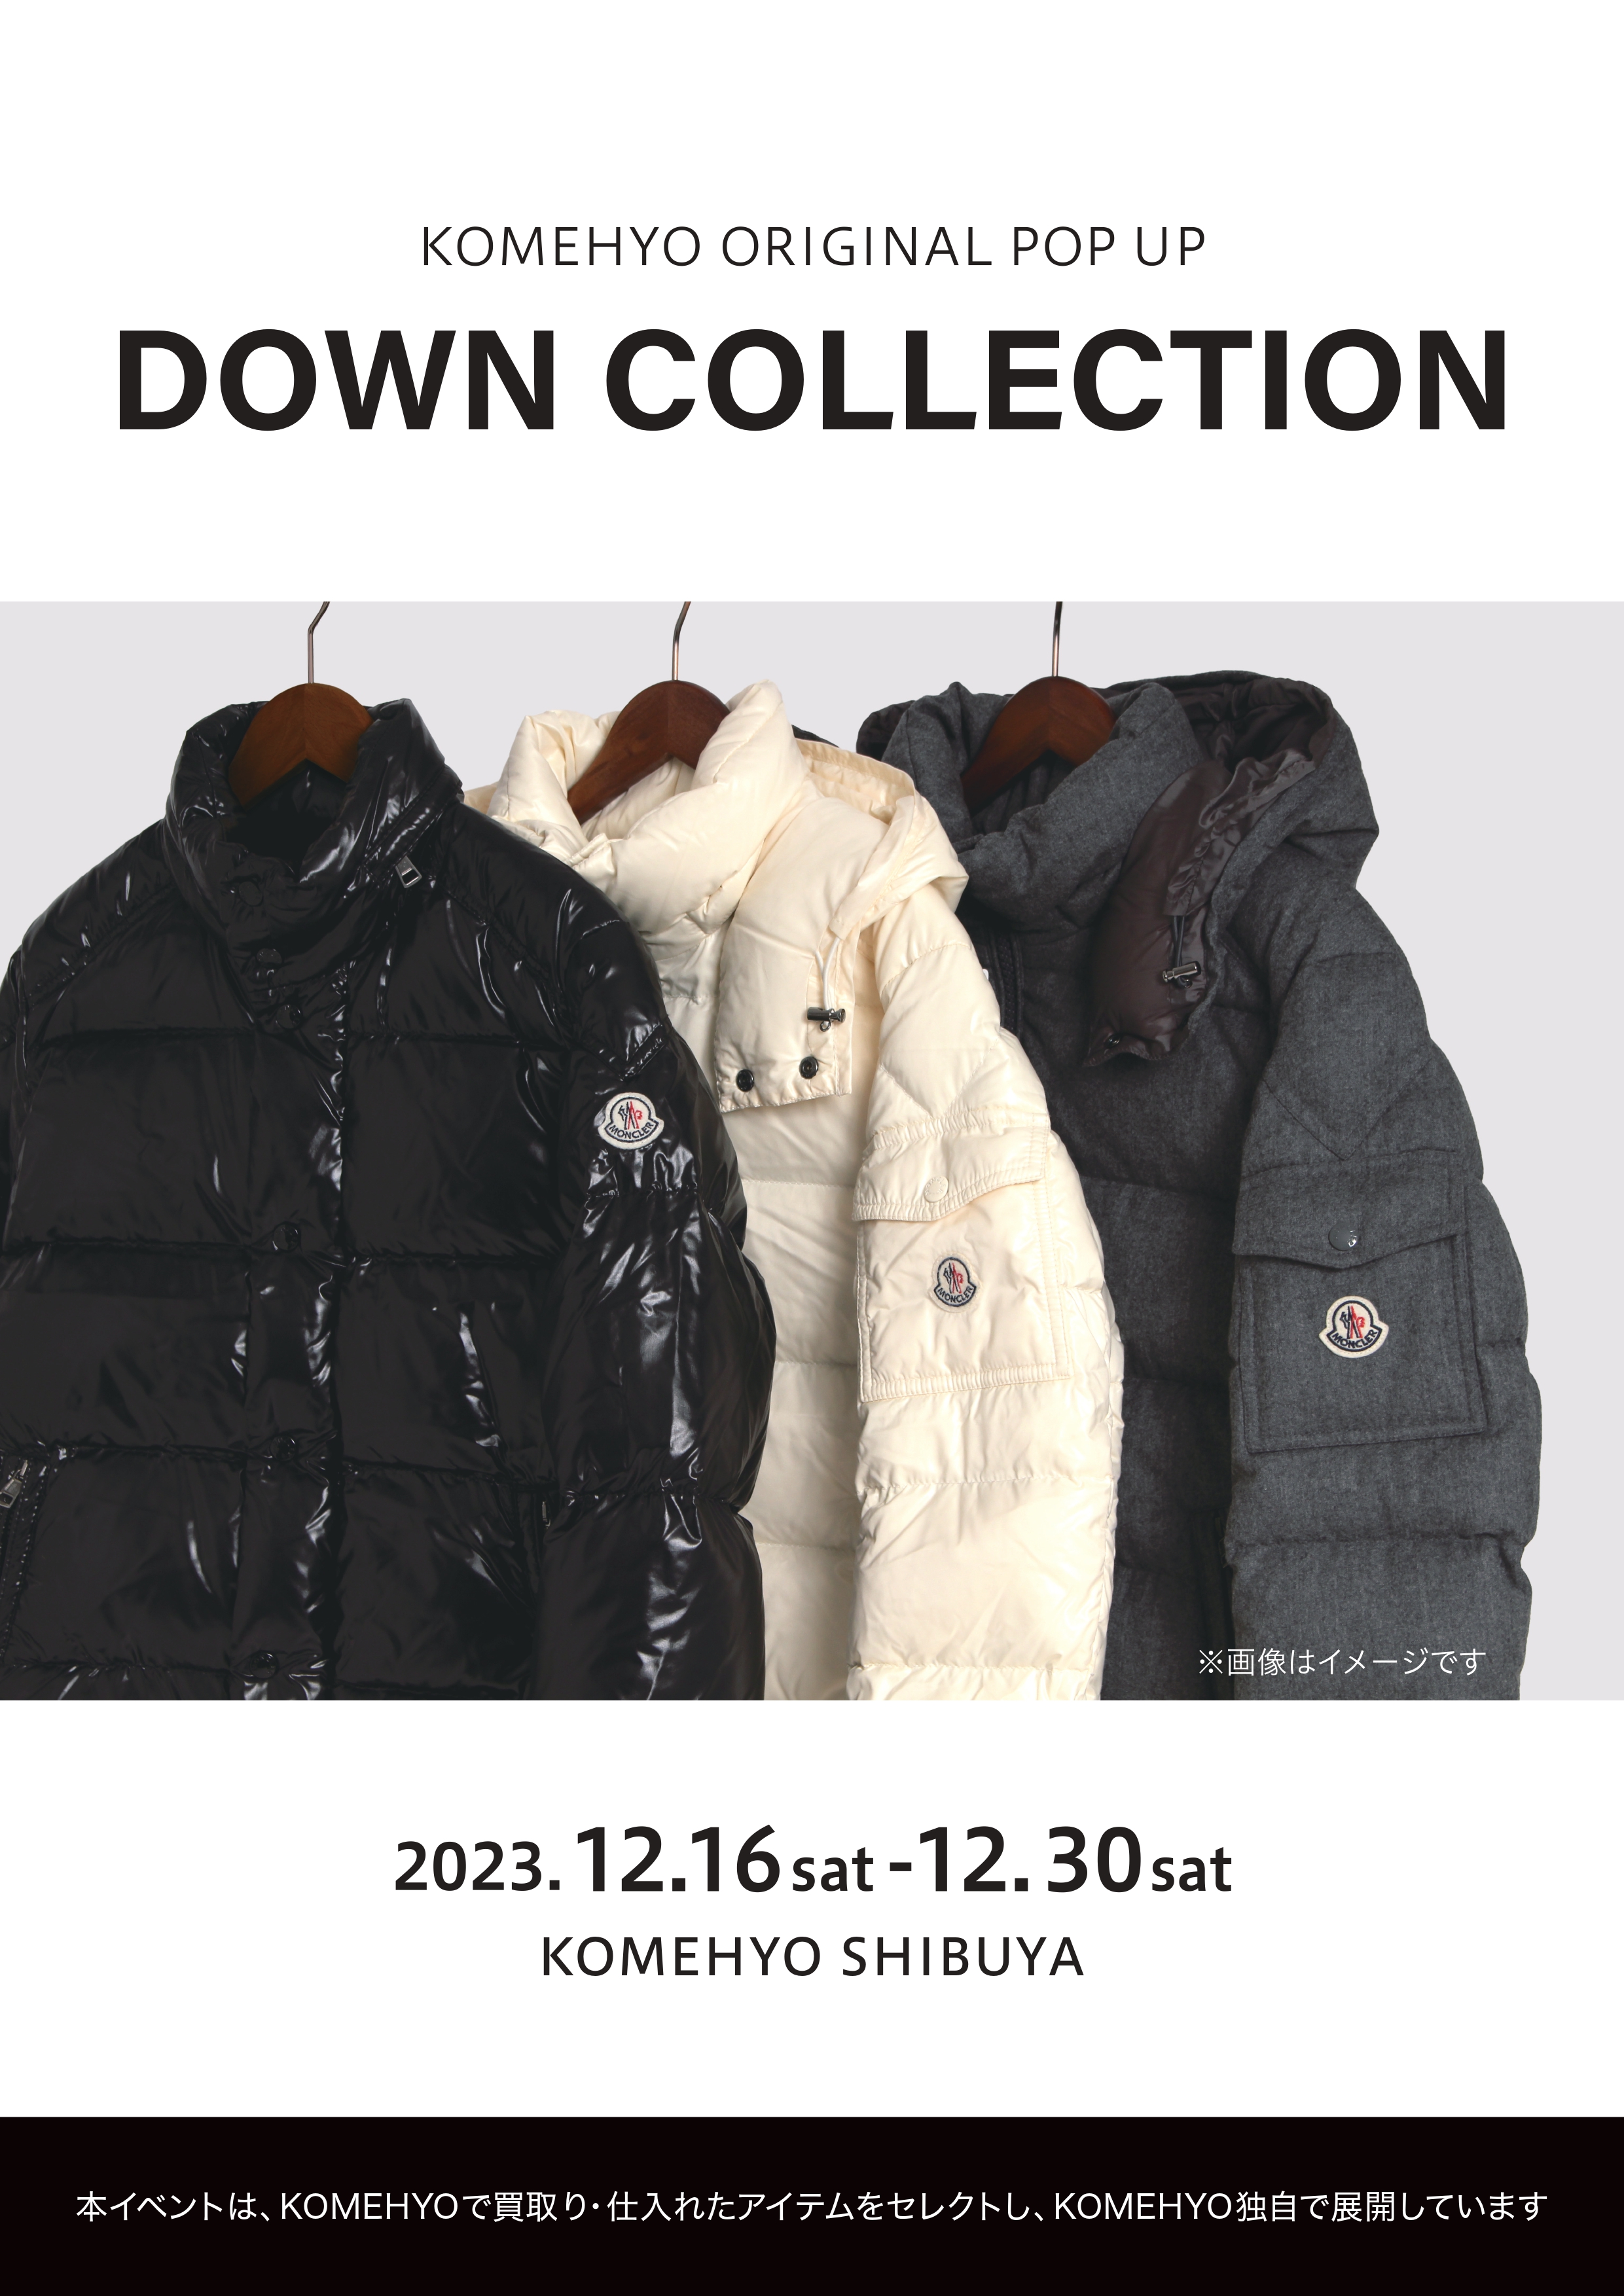 DOWN COLLECTION